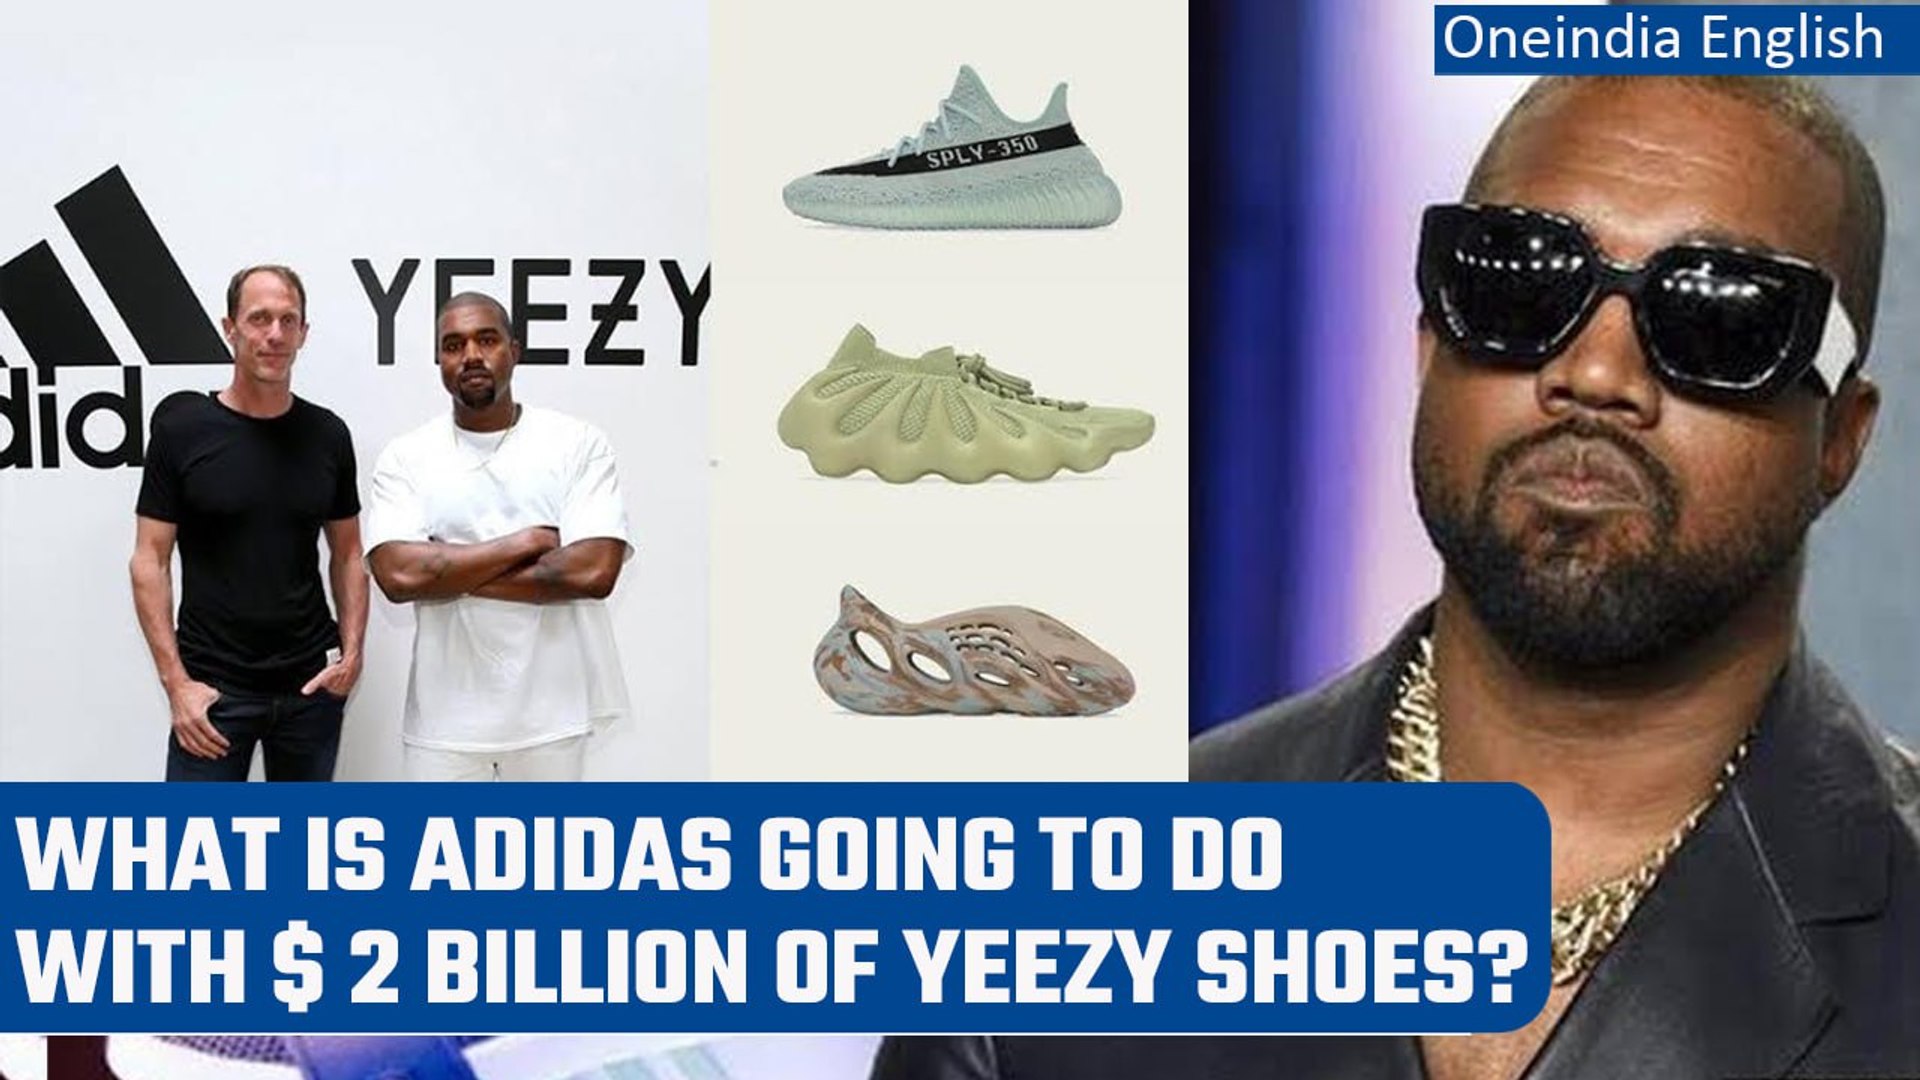 Adidas is wondering what to do with Yeezy shoes after split with rapper  Kanye West | Oneindia News - video Dailymotion